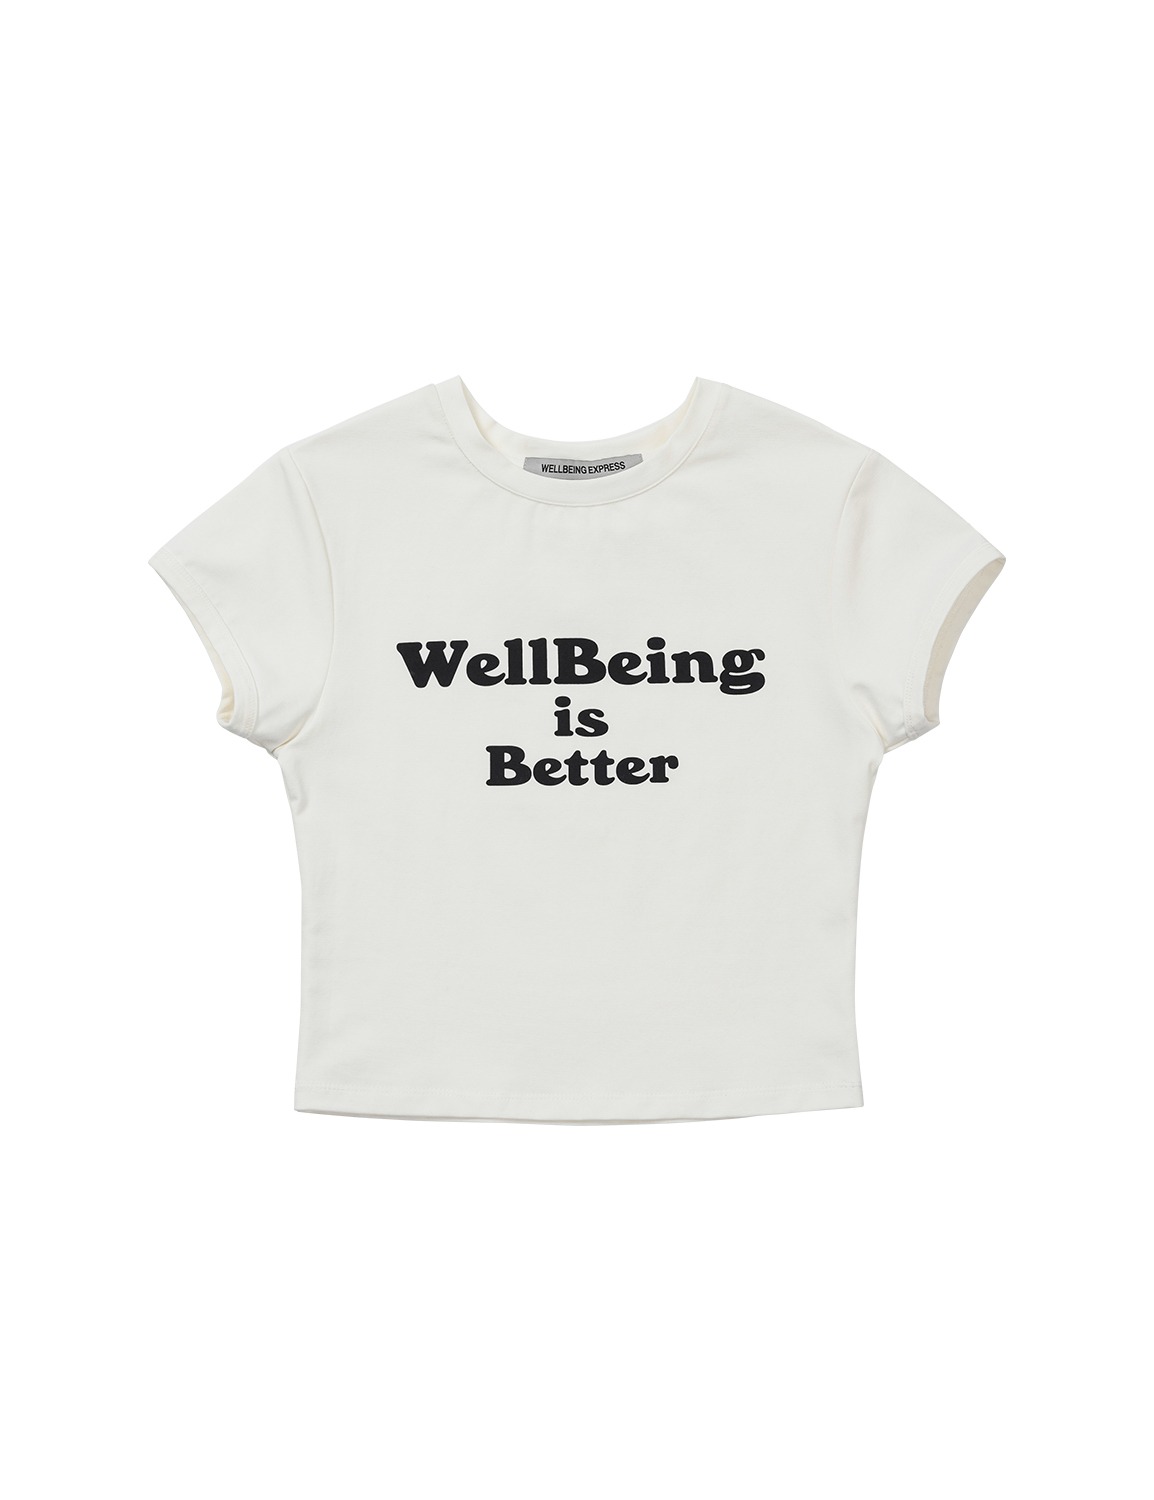 Wellbeing Is Better Half Sleeve White